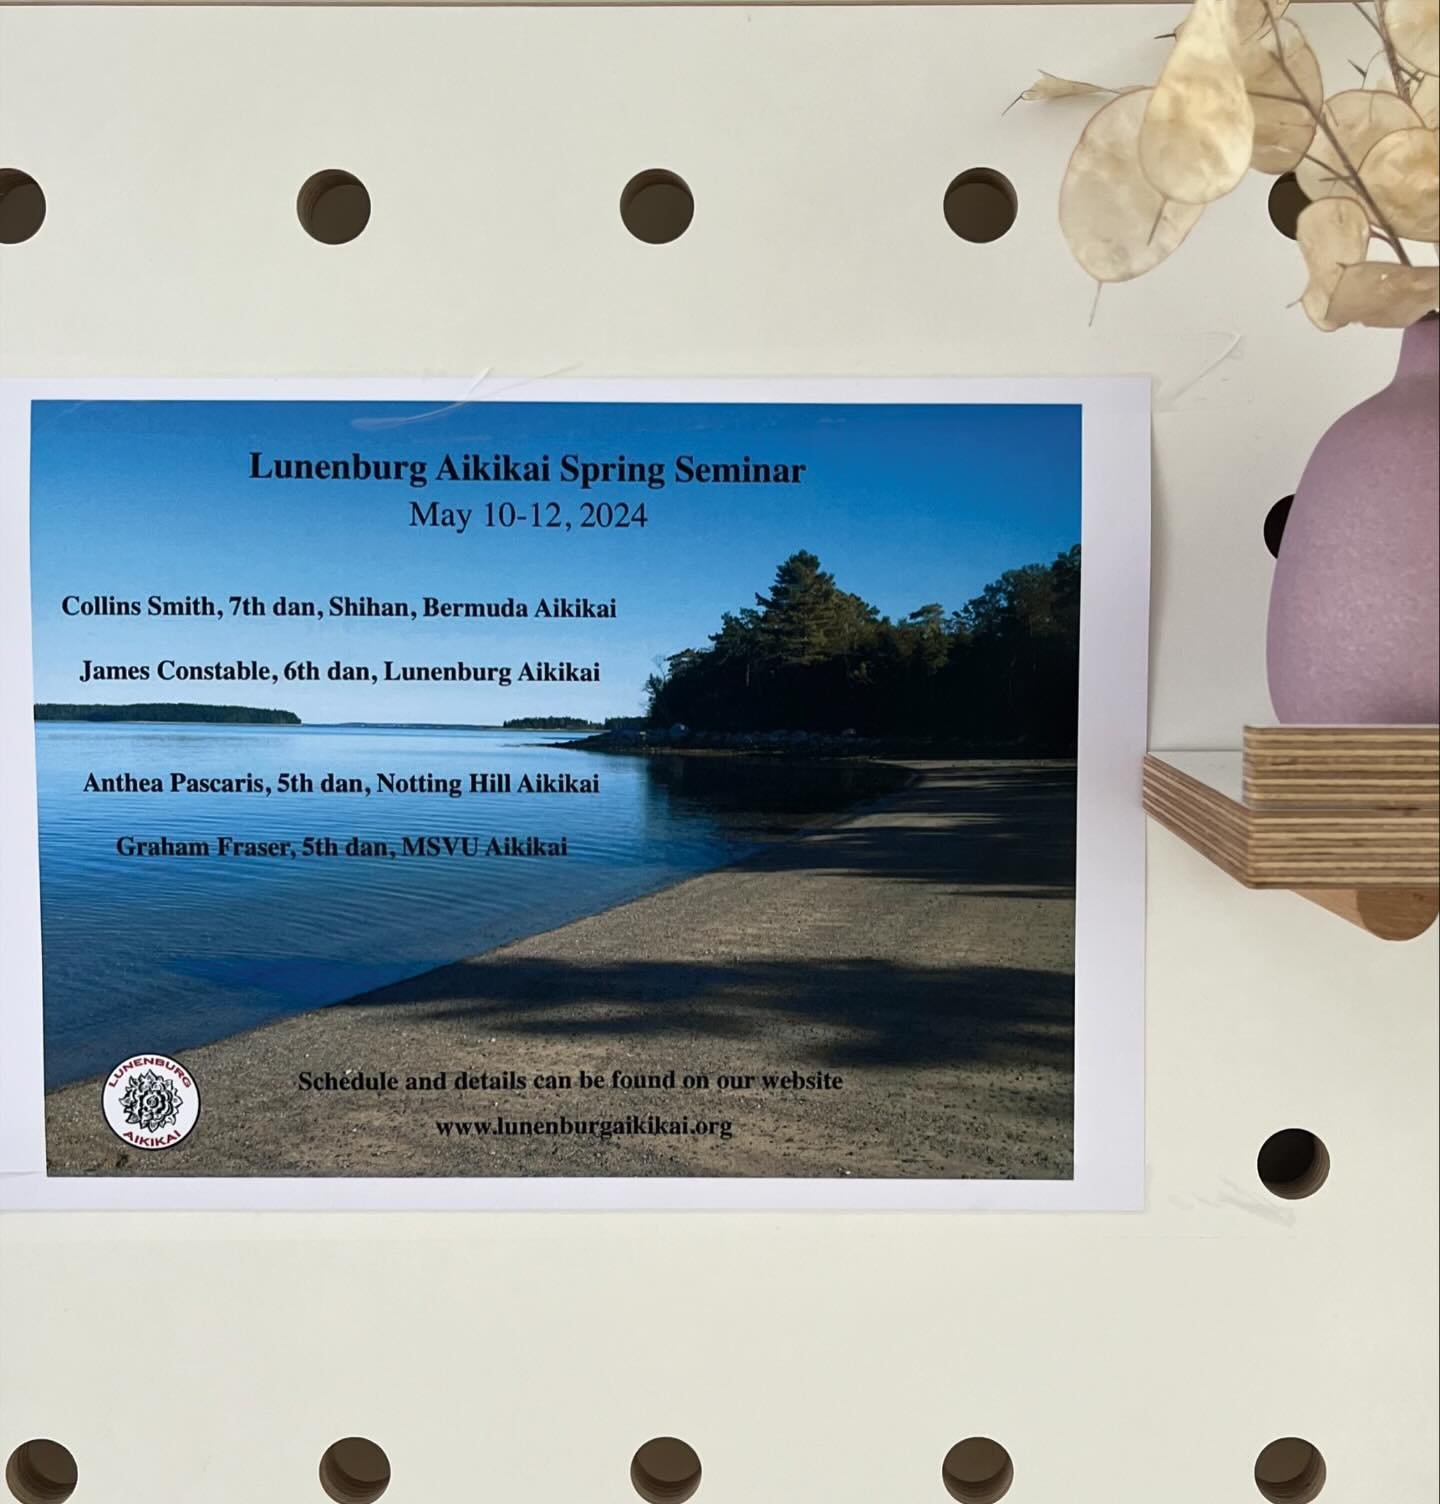 Can&rsquo;t wait to see my aikido family in Canada next weekend🥰 
@lunenburgaikikai @bermuda.aikikai 

#aikidoseminar #aikidoaikikai #aikidofamily #aikidotraining